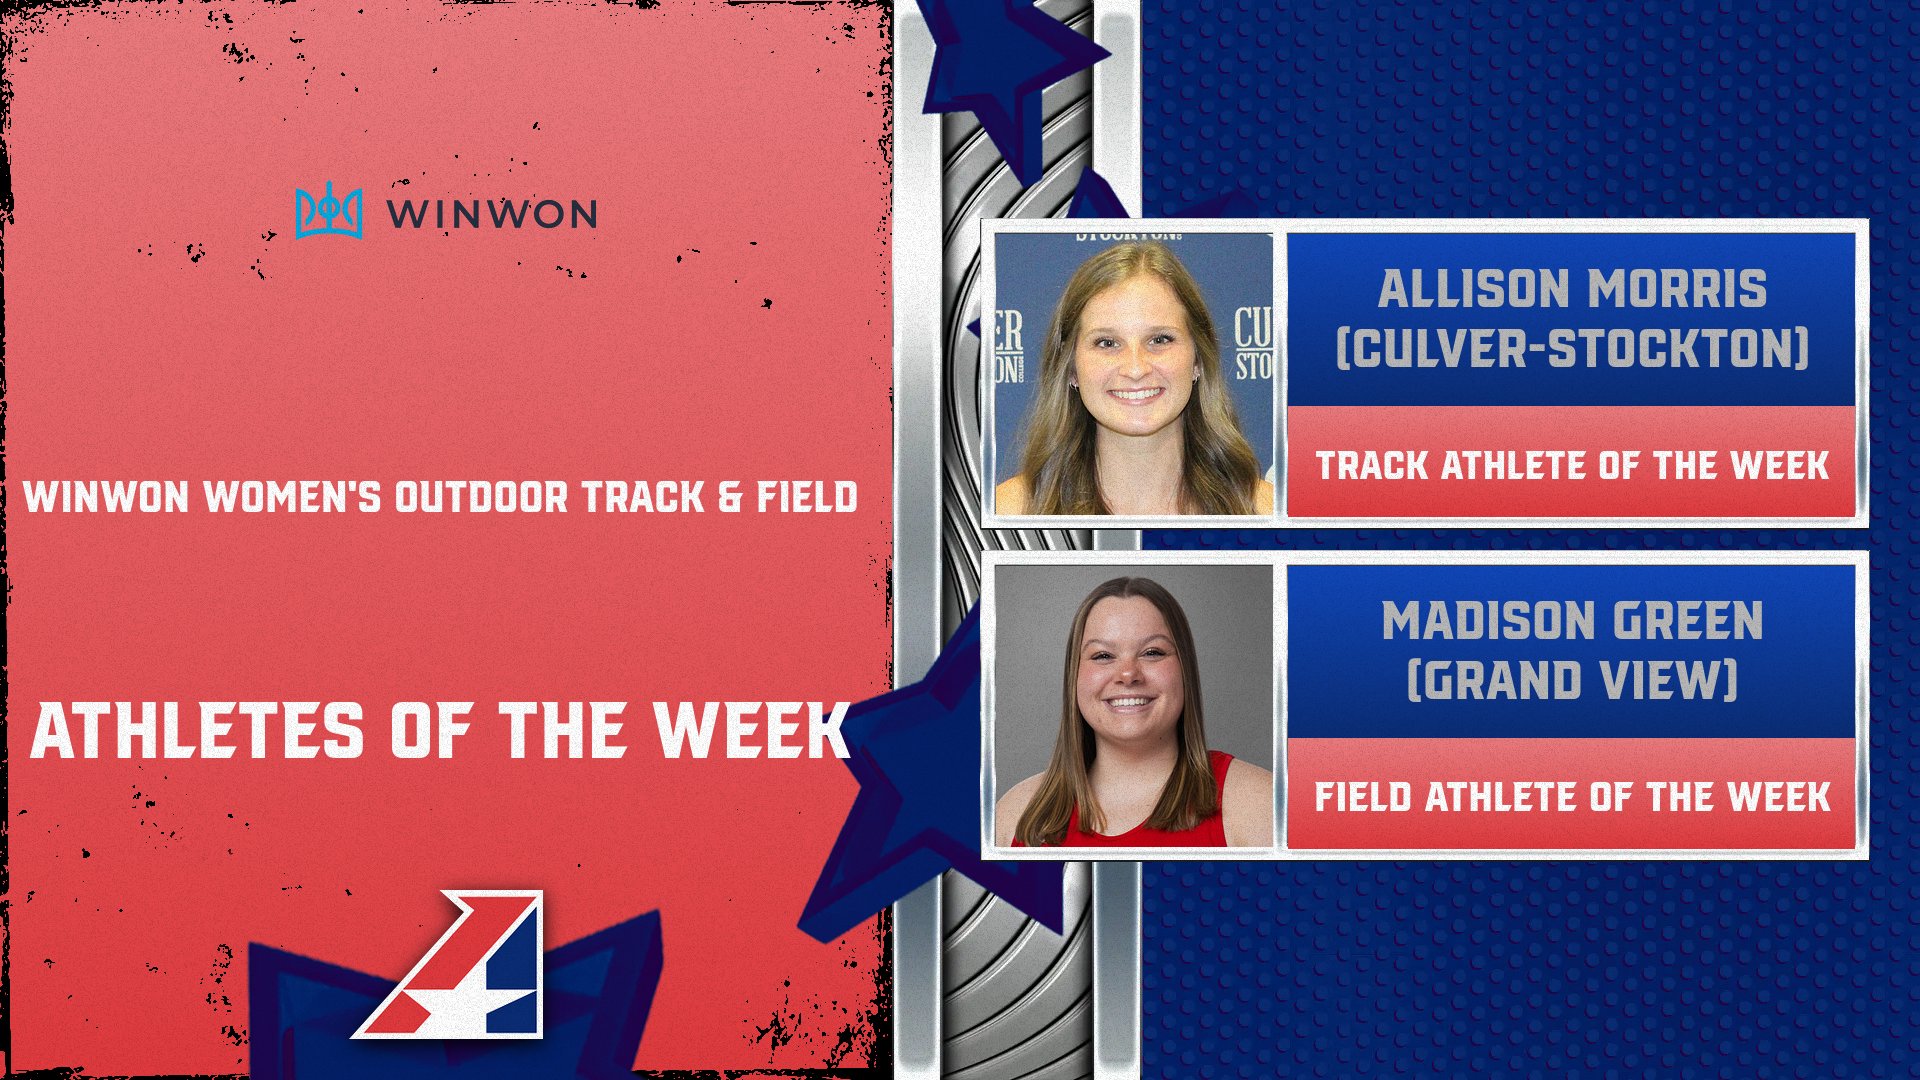 WinWon Women’s Outdoor Track & Field Athletes of the Week Announced